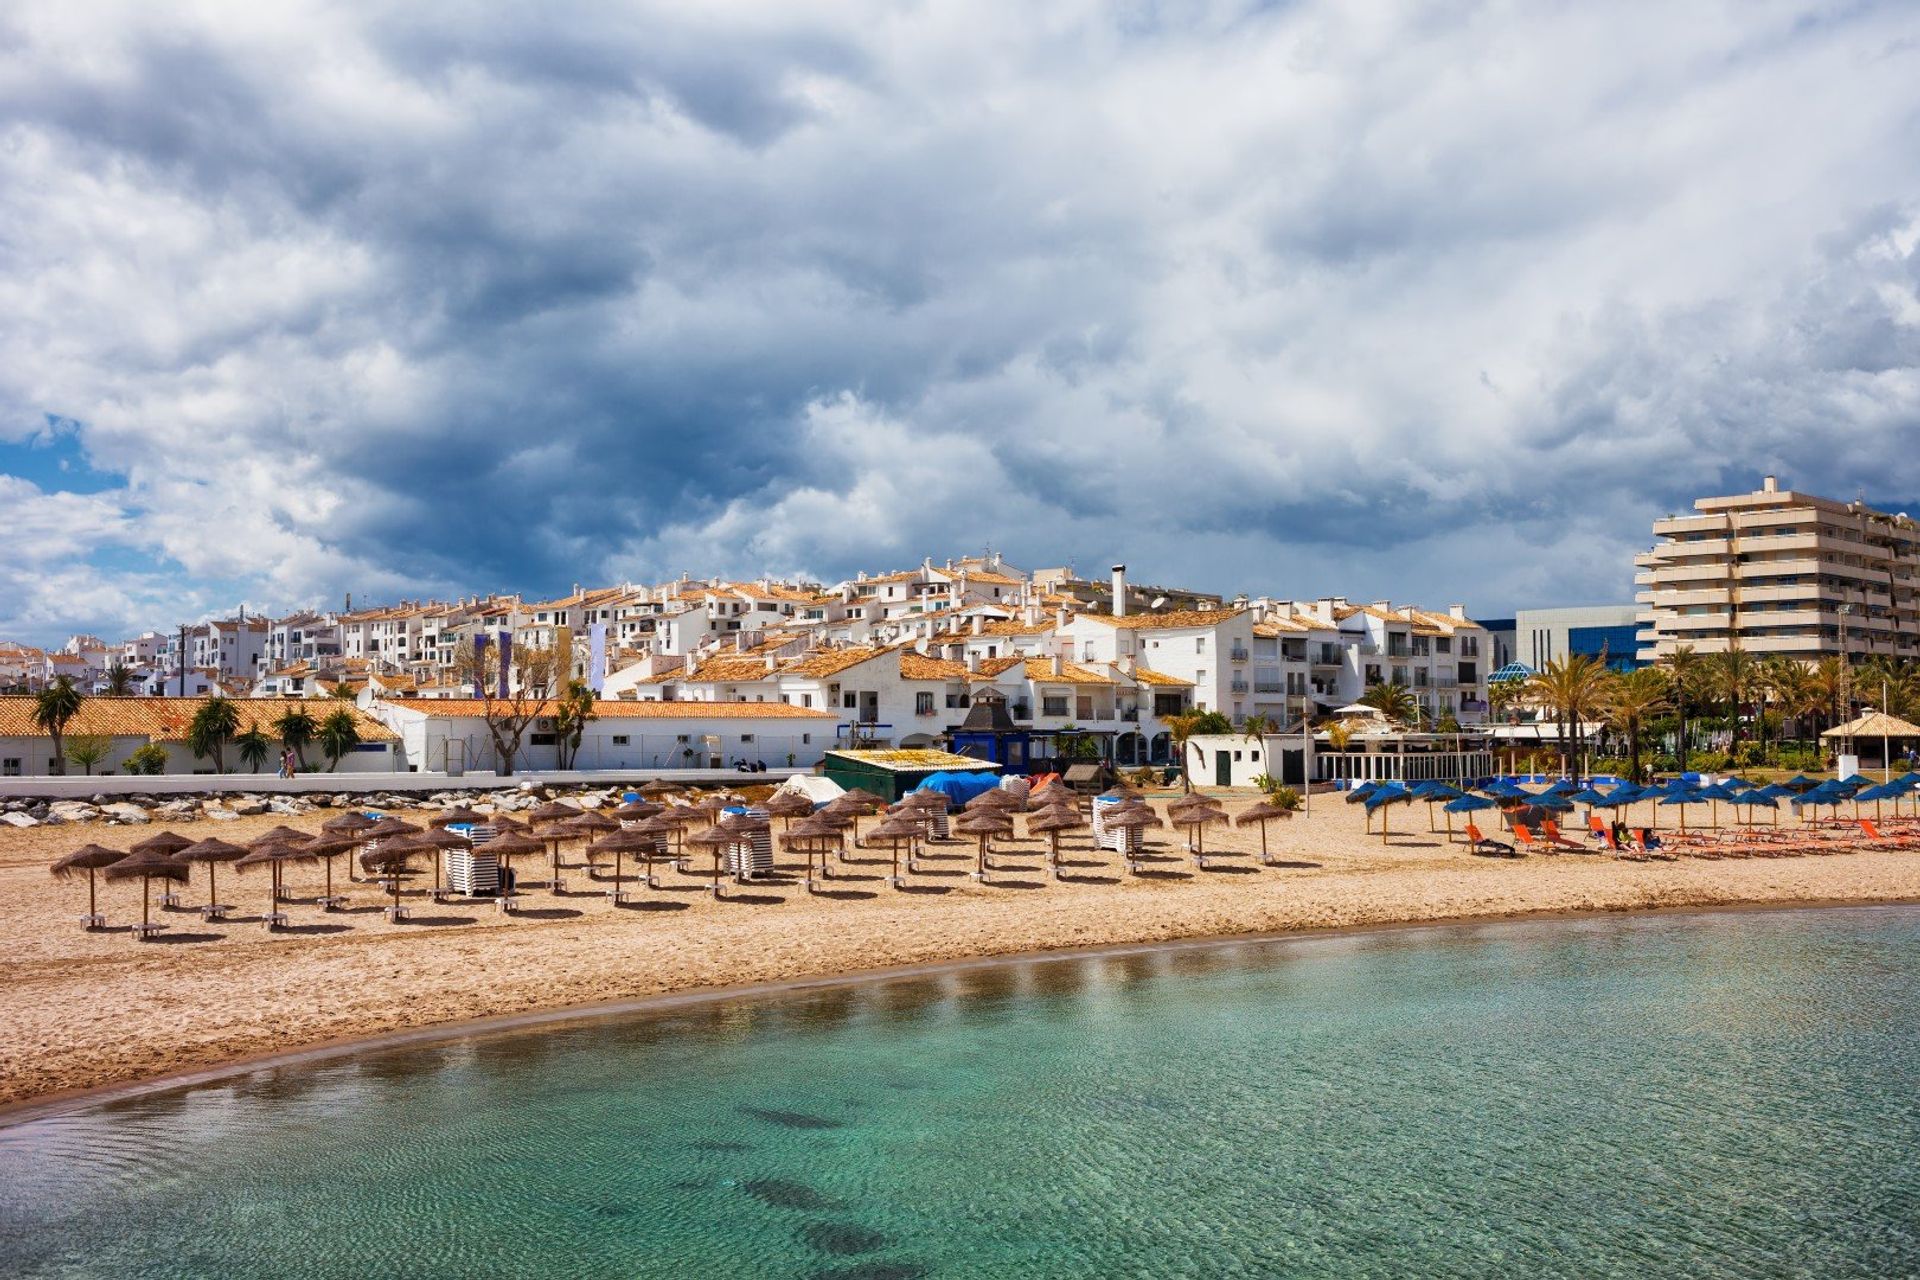 If you're after people watching, sunbathing or a lazy day on the beach, Levante is the perfect option